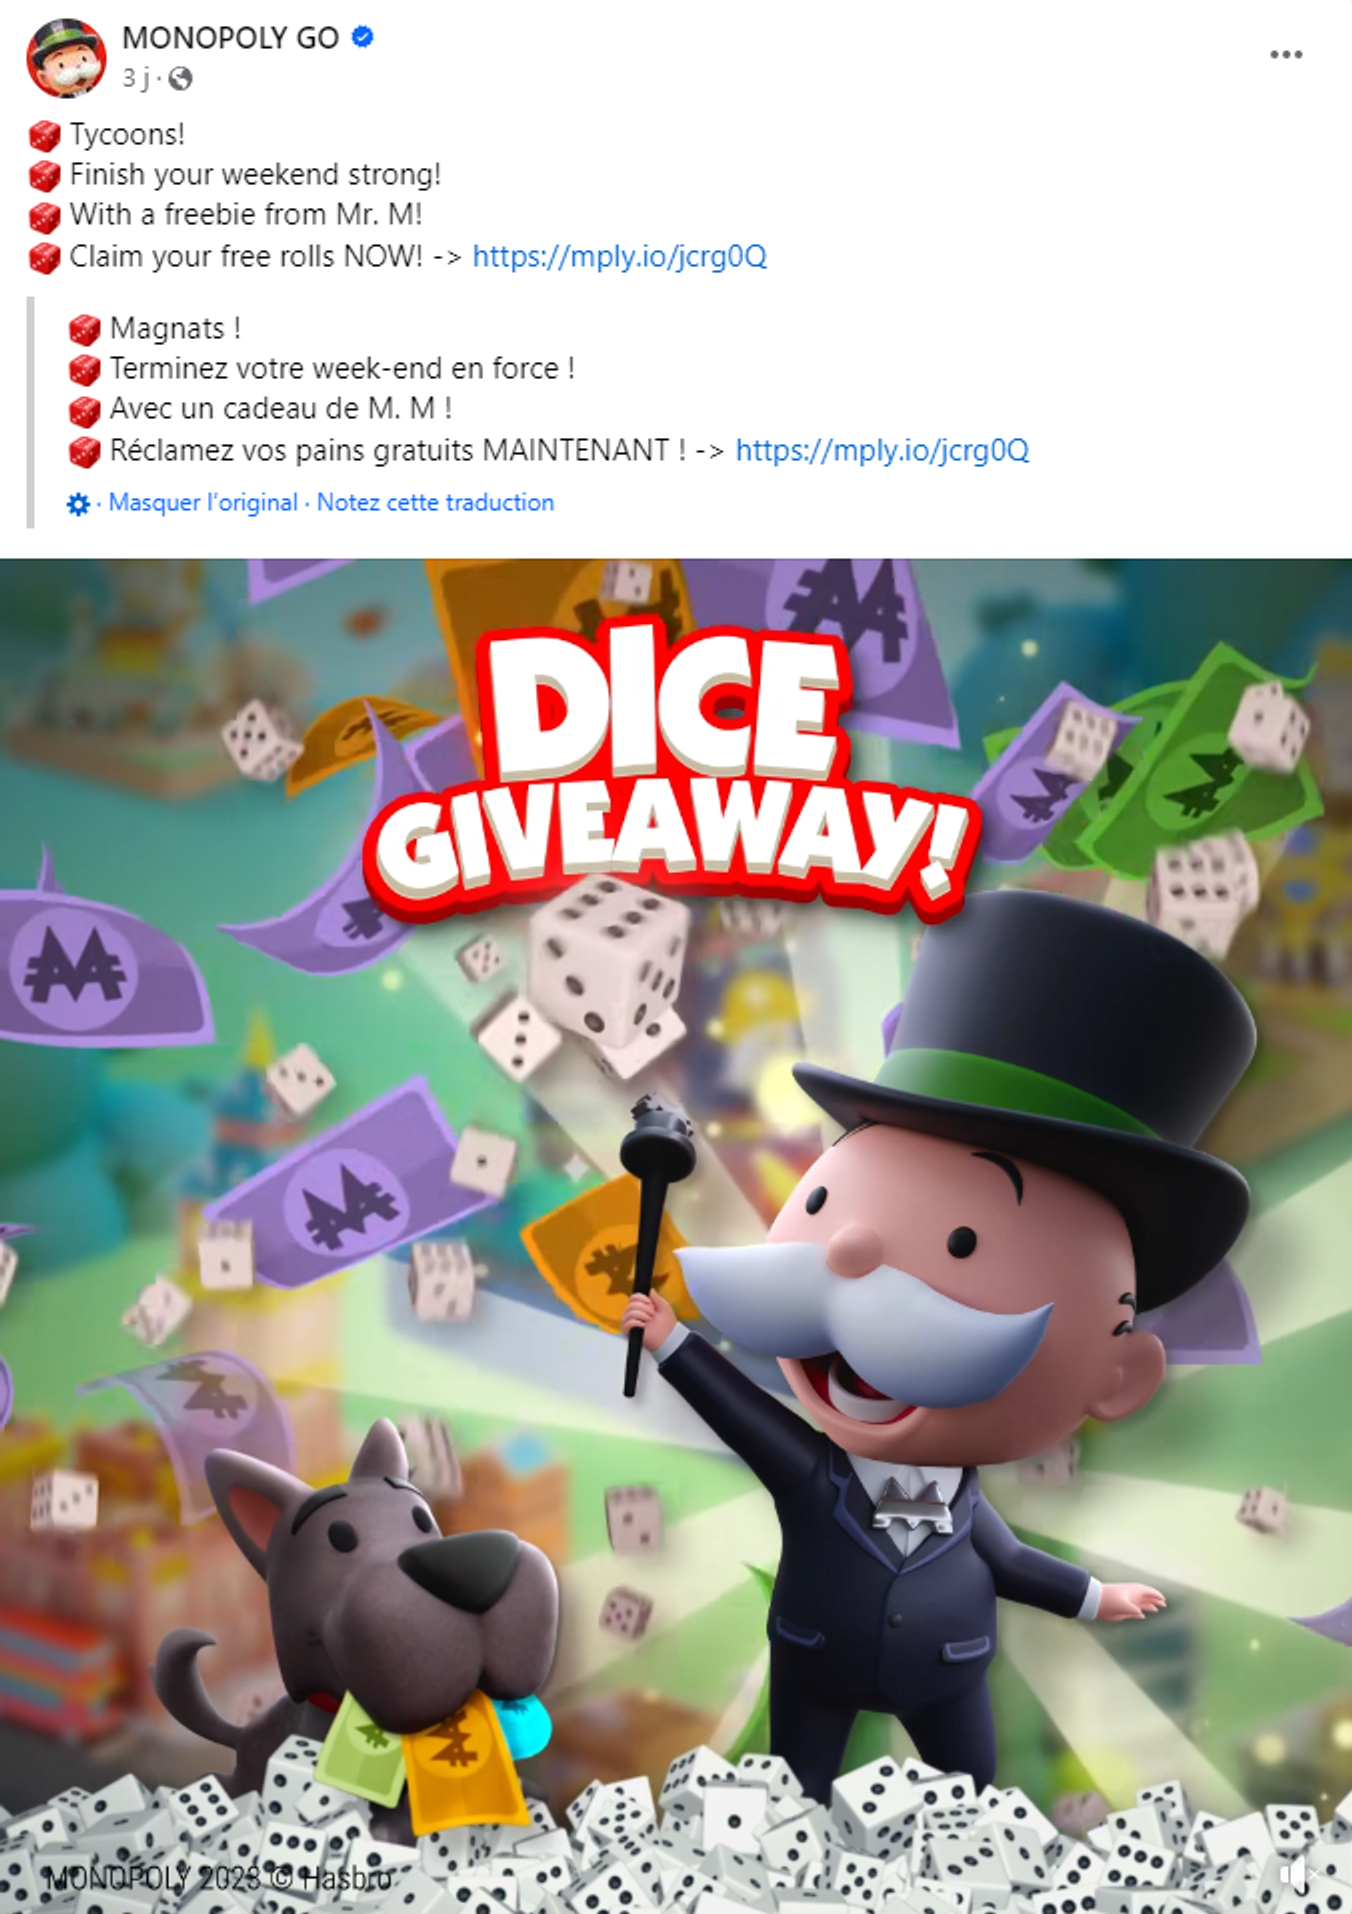 monopoly-go-facebook-free-dices